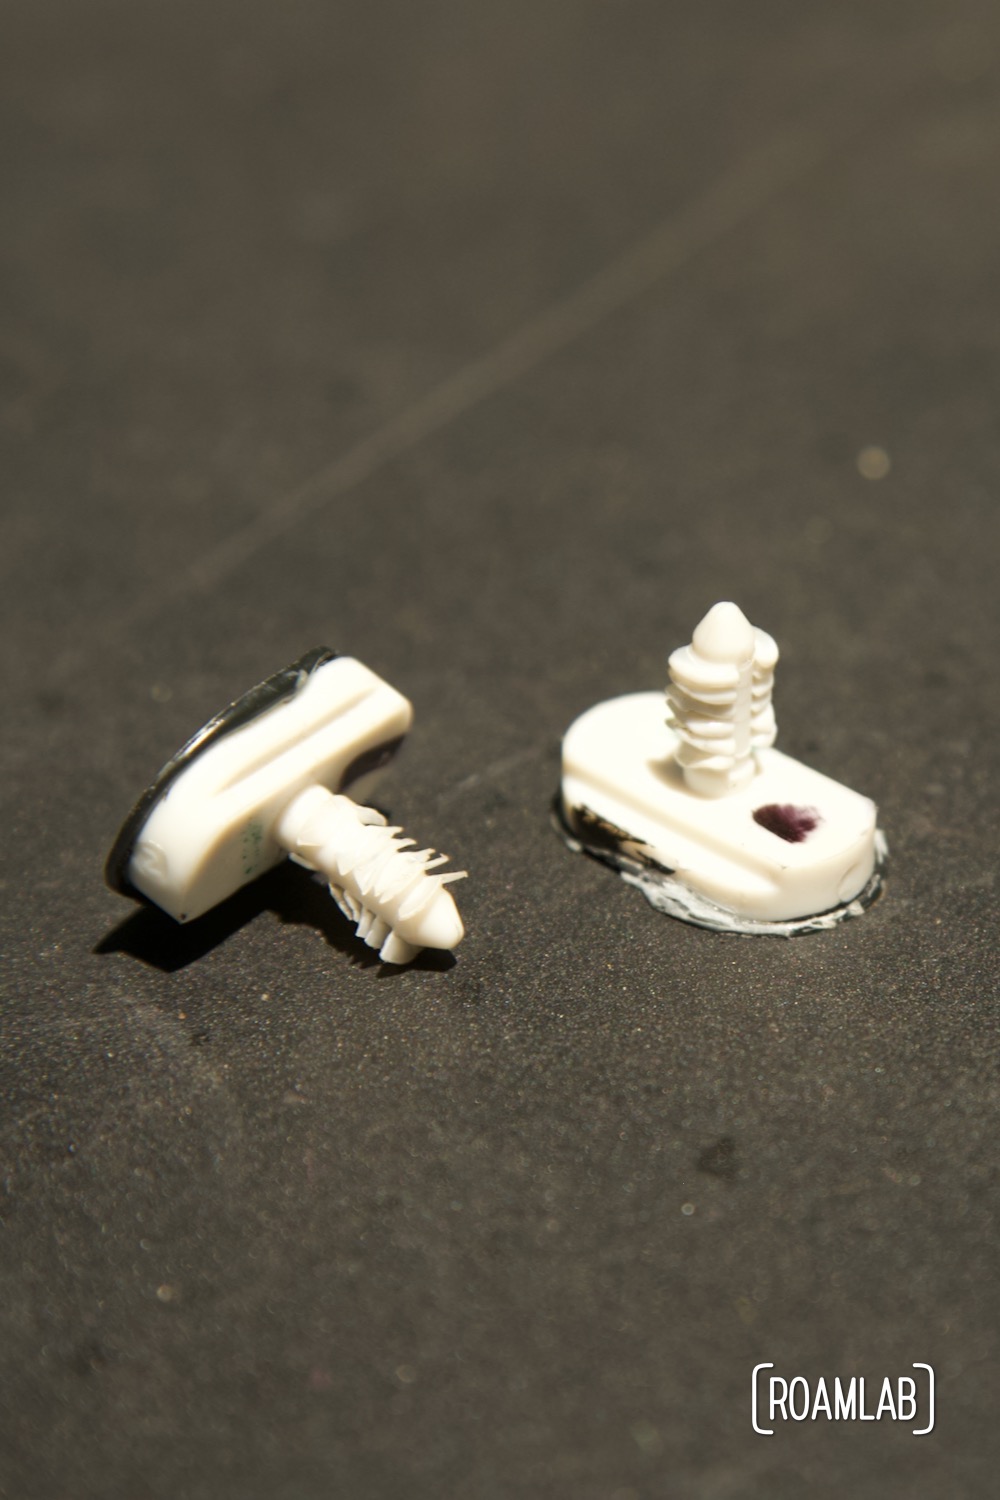 Two plastic white spacers sitting on a black surface.